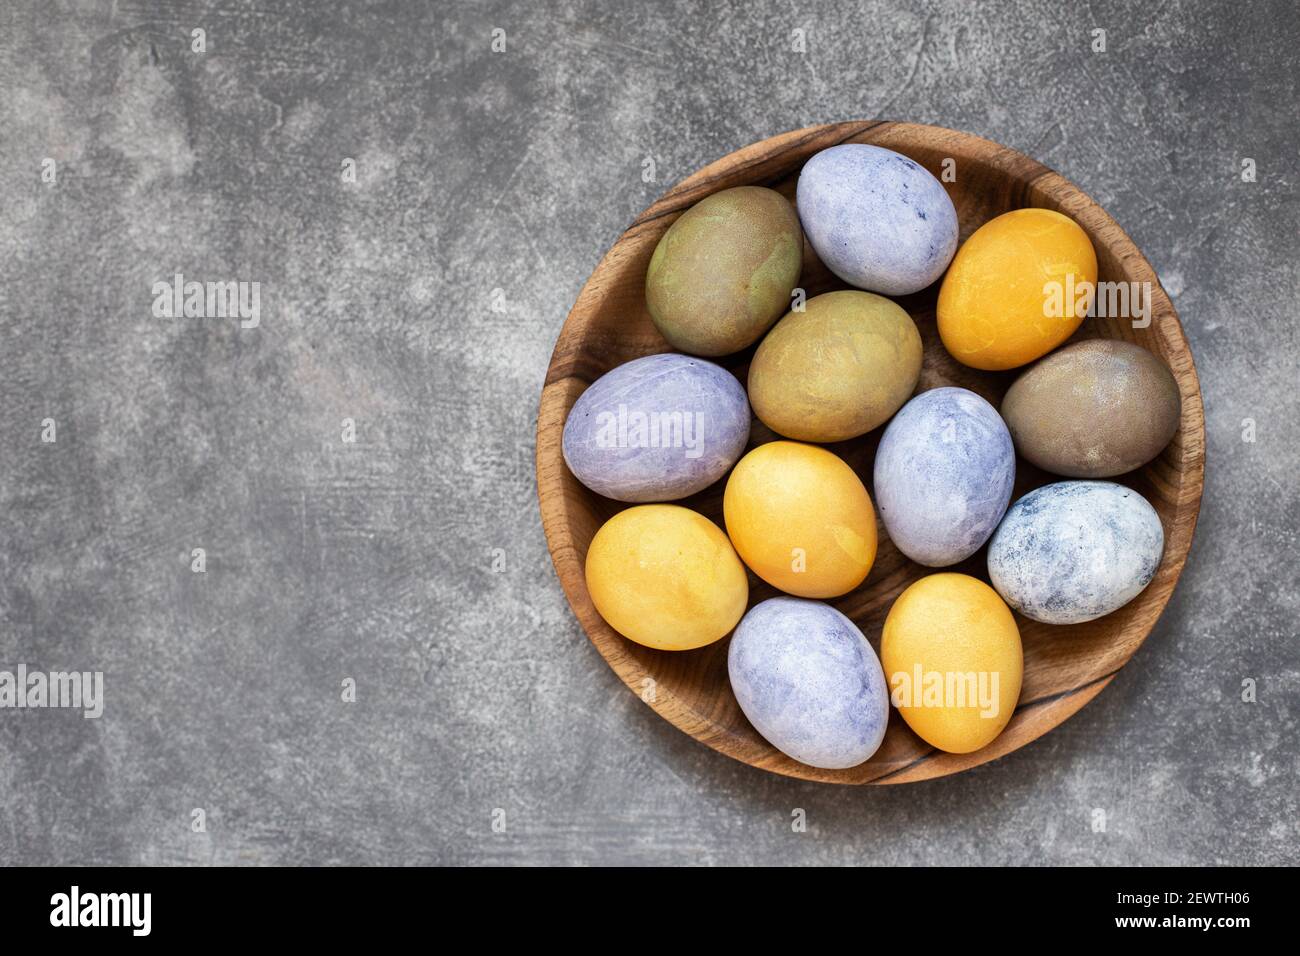 Easter eggs on wooden plate painted with natural dyes. Top view, close up. Stock Photo